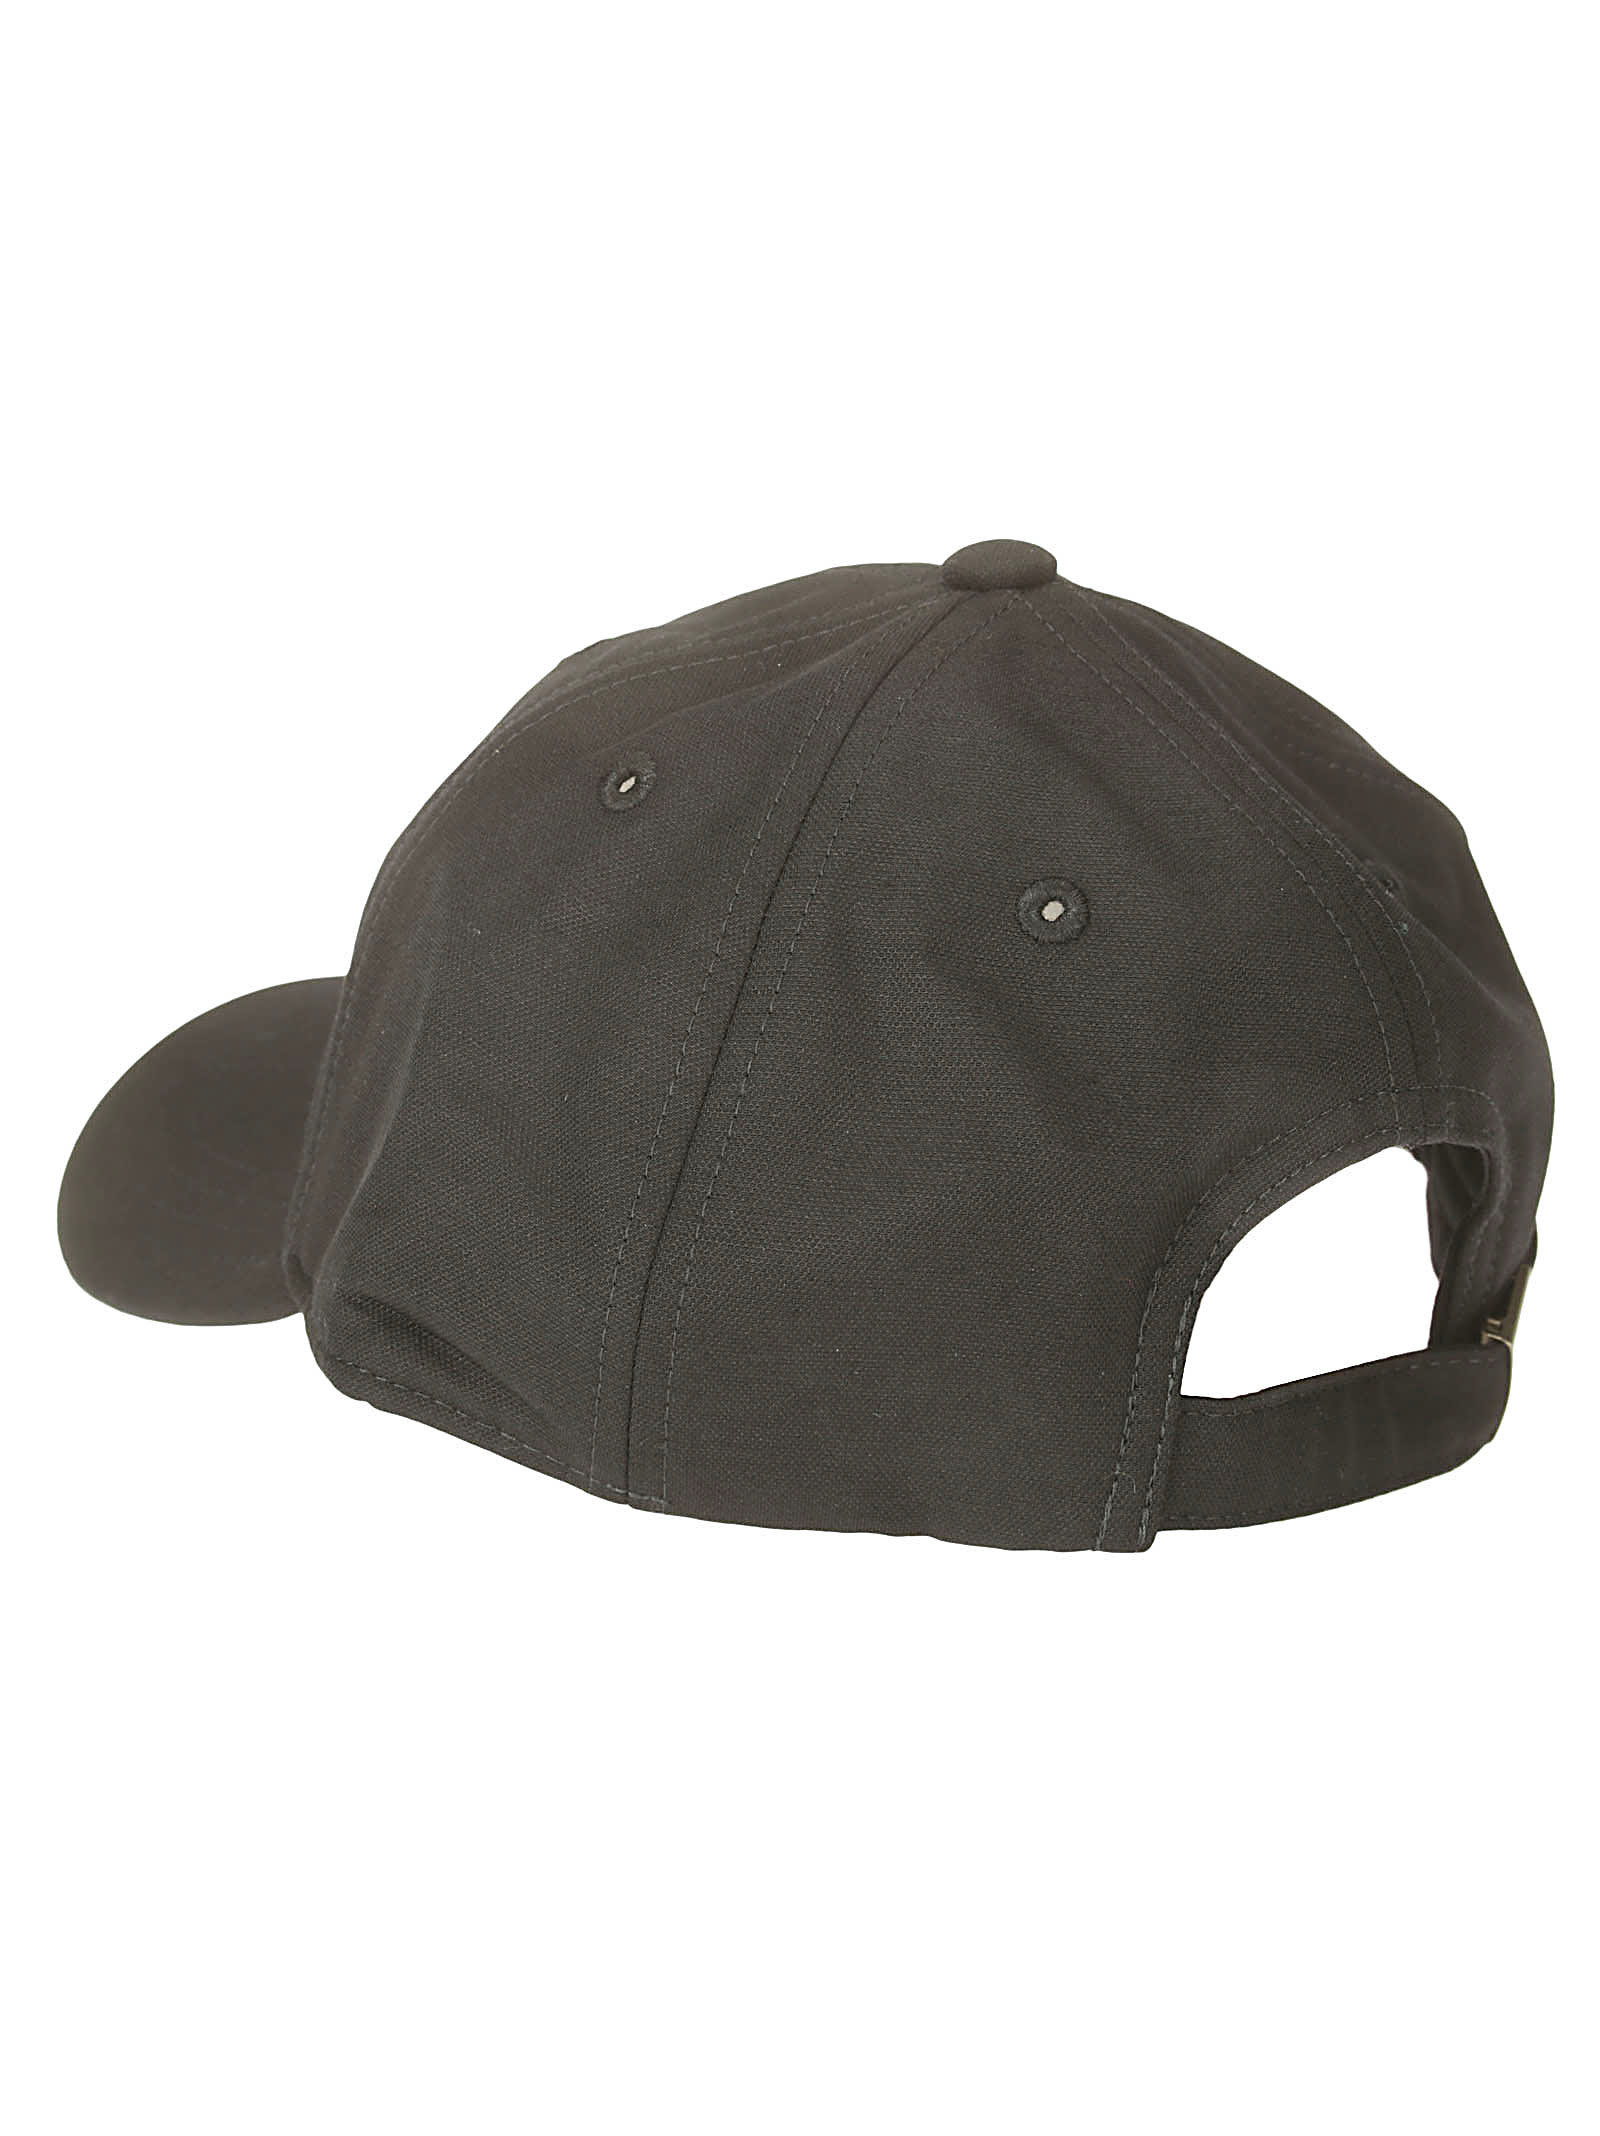 Shop Our Legacy Ballcap In Deluxe Black Exquisite